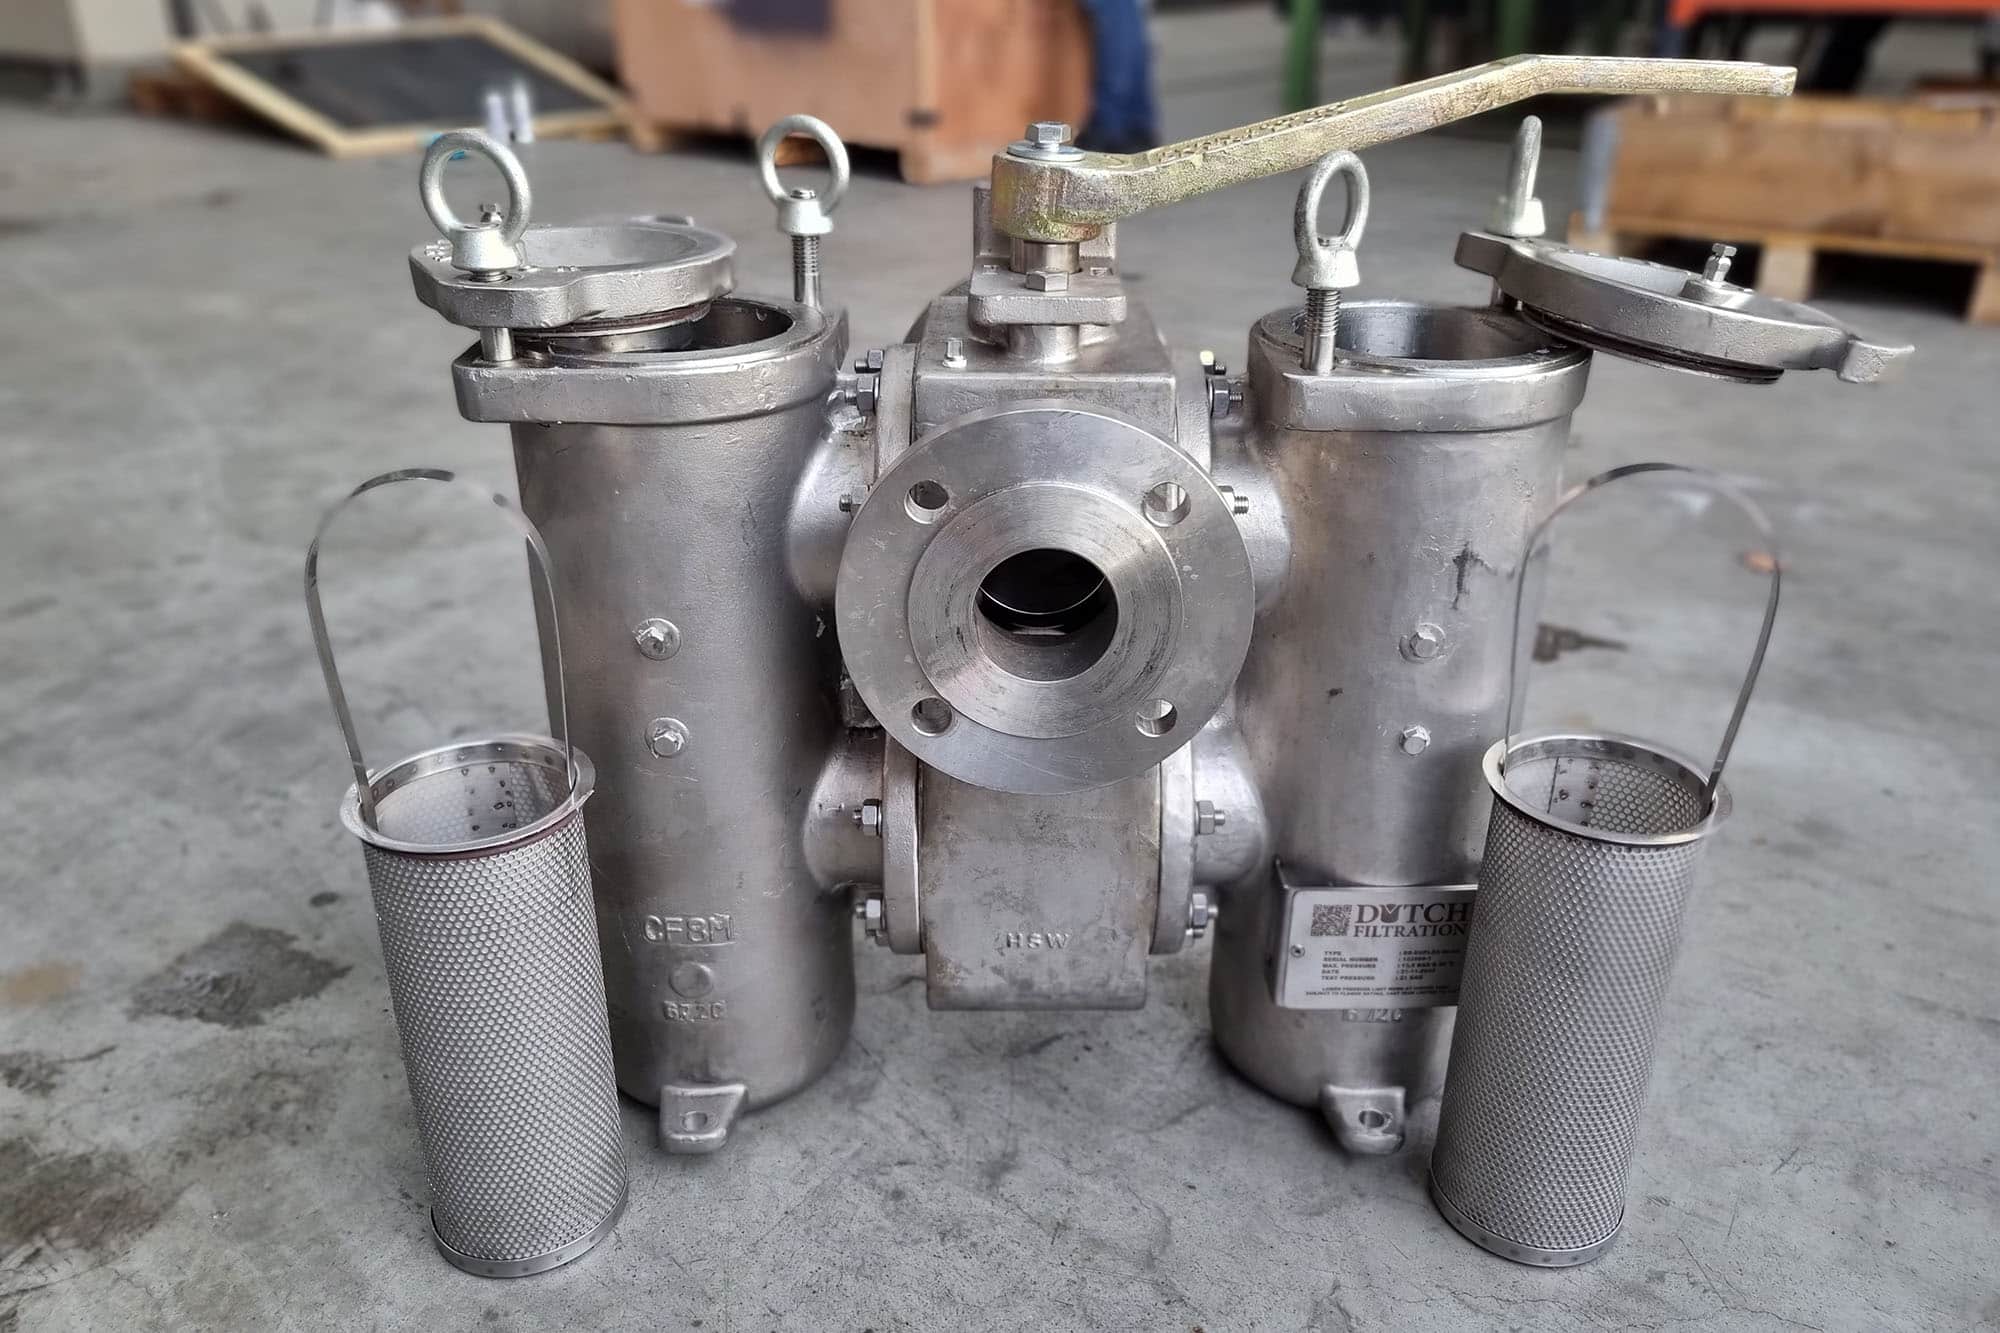 Stainless Steel Dual basket strainers and Simplex basket strainers